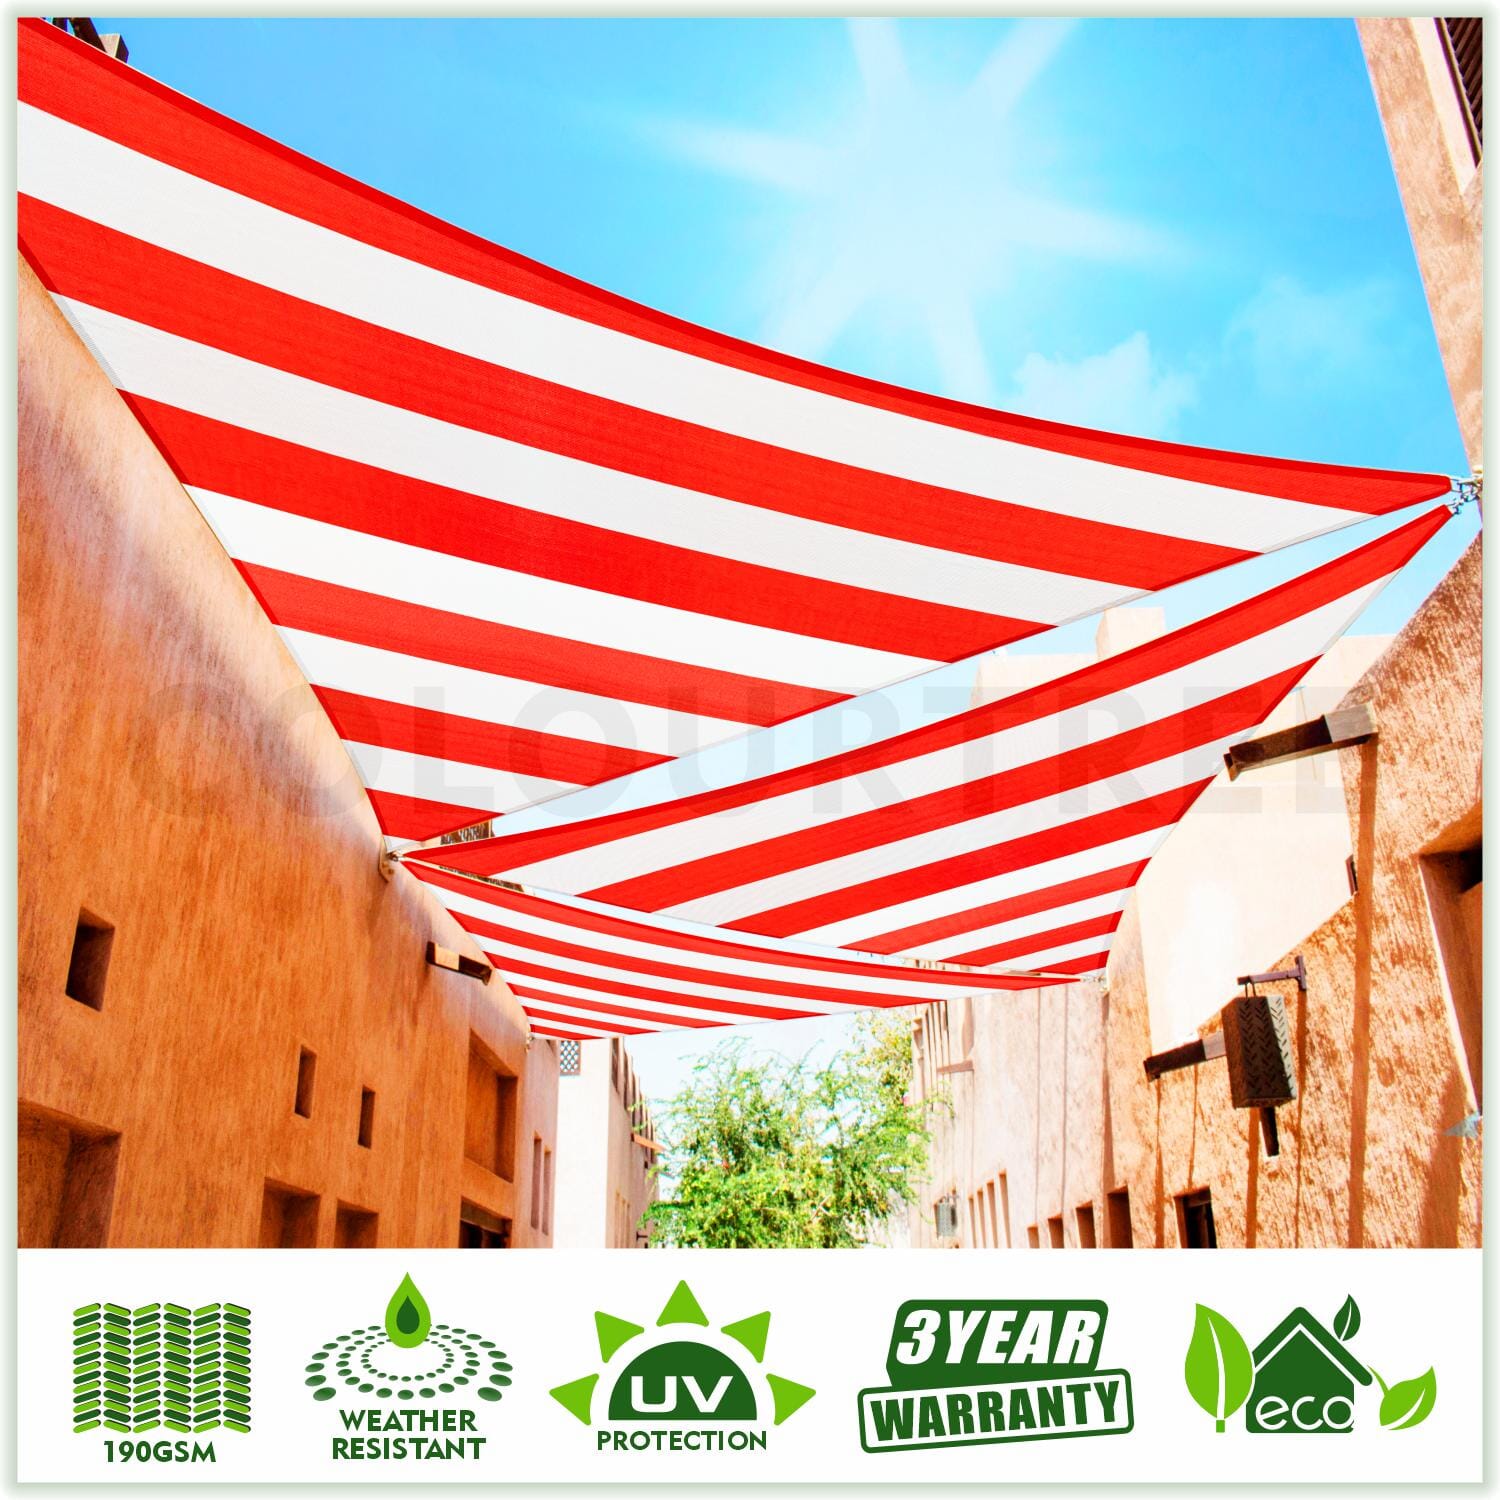 Right Triangle Sun Shade Sail Canopy, Commercial Grade, 7 Sizes, 8 Colors Sun Shade Sail Colourtree 12' x 12' x 17' Red / White 